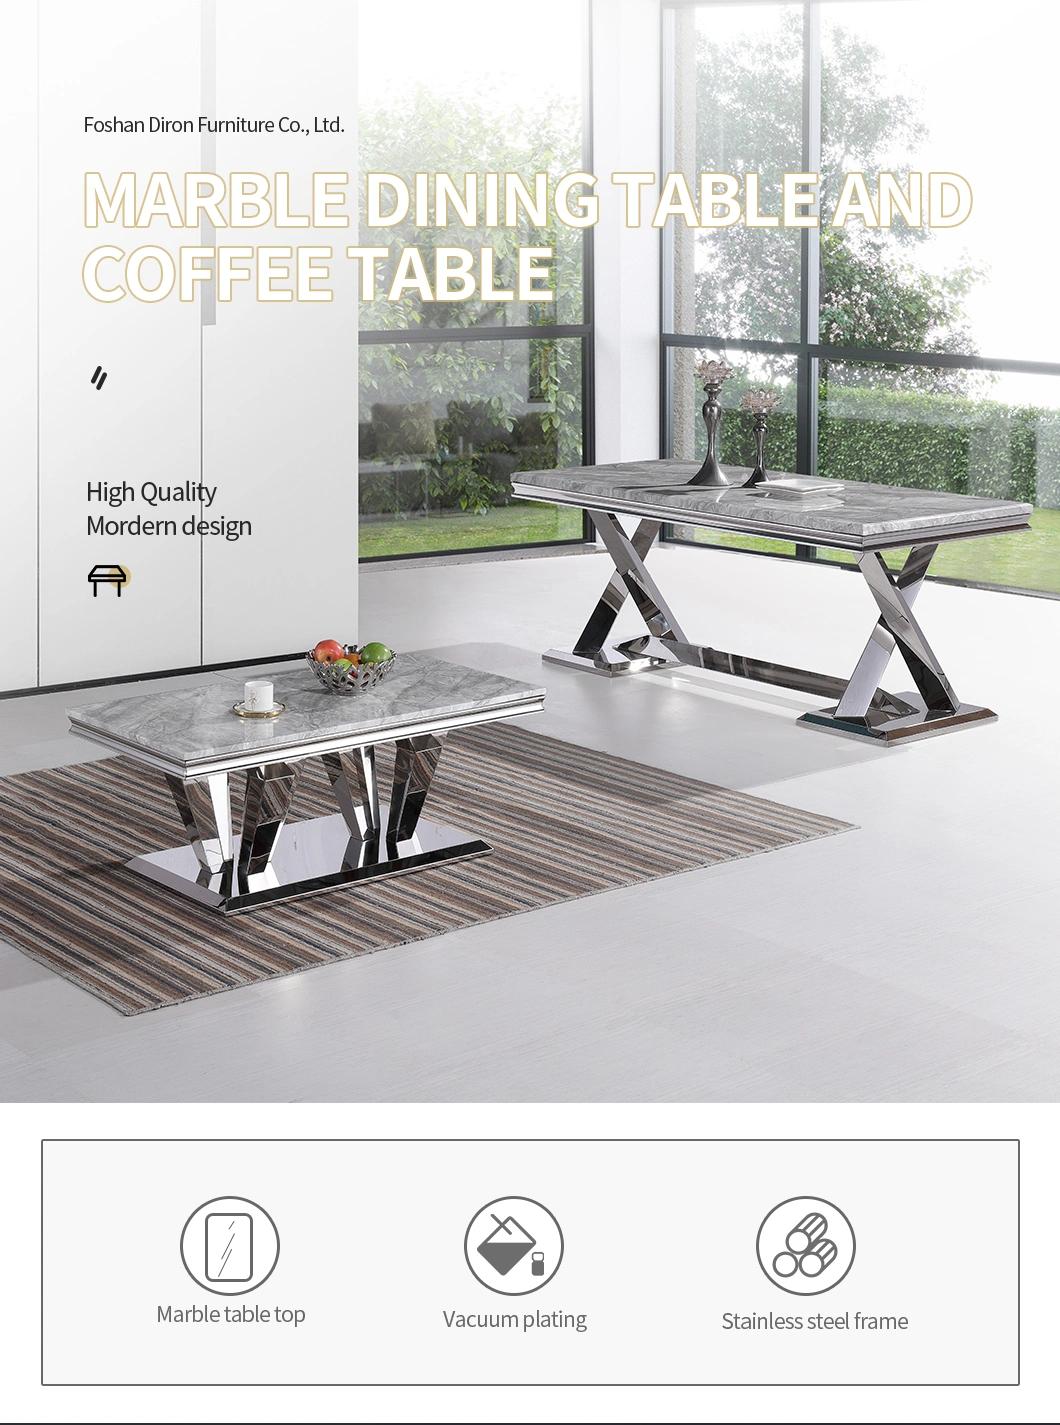 Natural Light Fixed Diron Carton Box Stainless Steel Dining Center Table